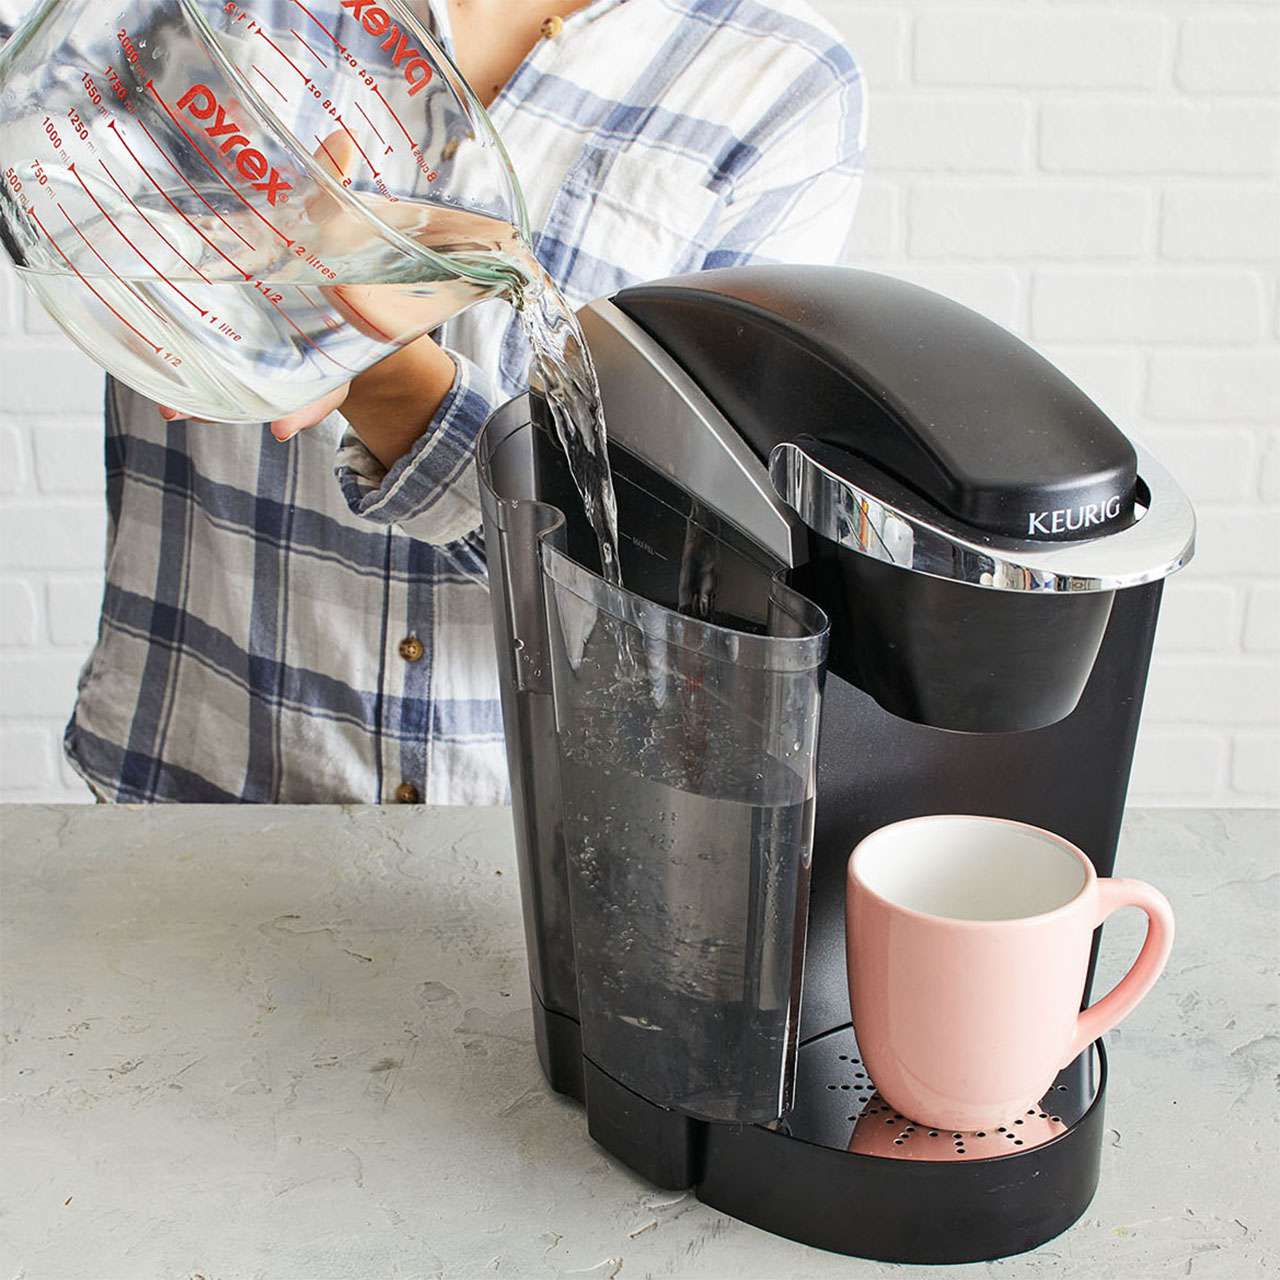 woman wearing plaid pouring water from pyrex measuring glass into keurig